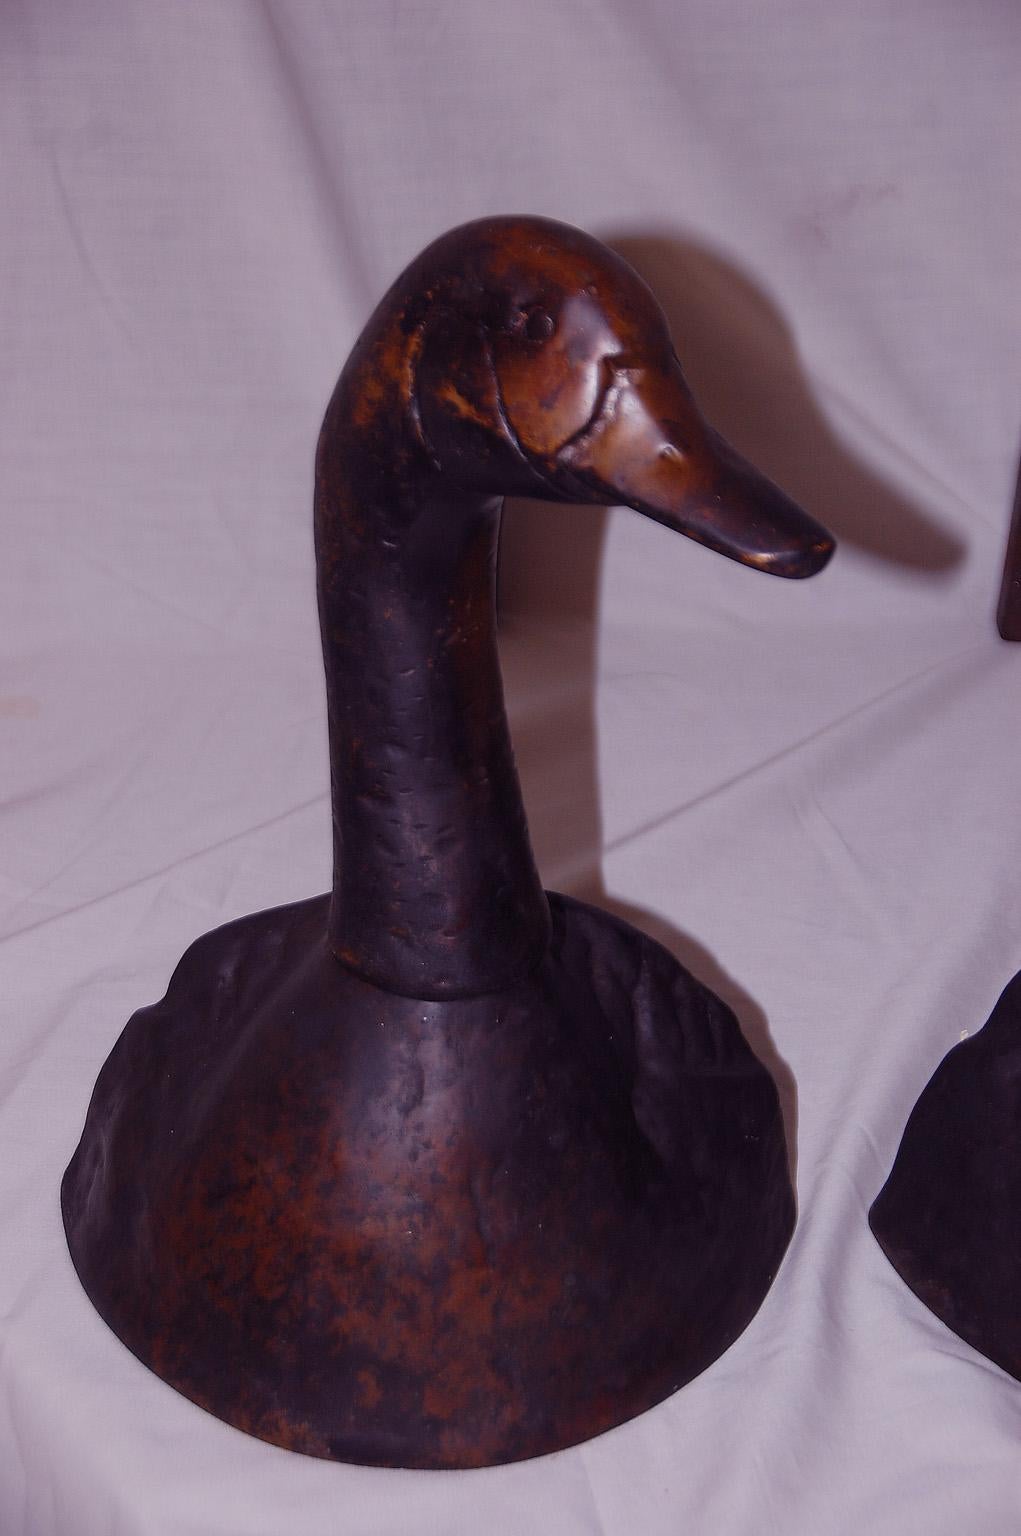 American cast brass duck andirons with heads that rotate to desired position. These exceptionally heavy and rare andirons have never been polished and retain a lovely soft patination. If the purchaser wanted them polished to a bright brass finish,